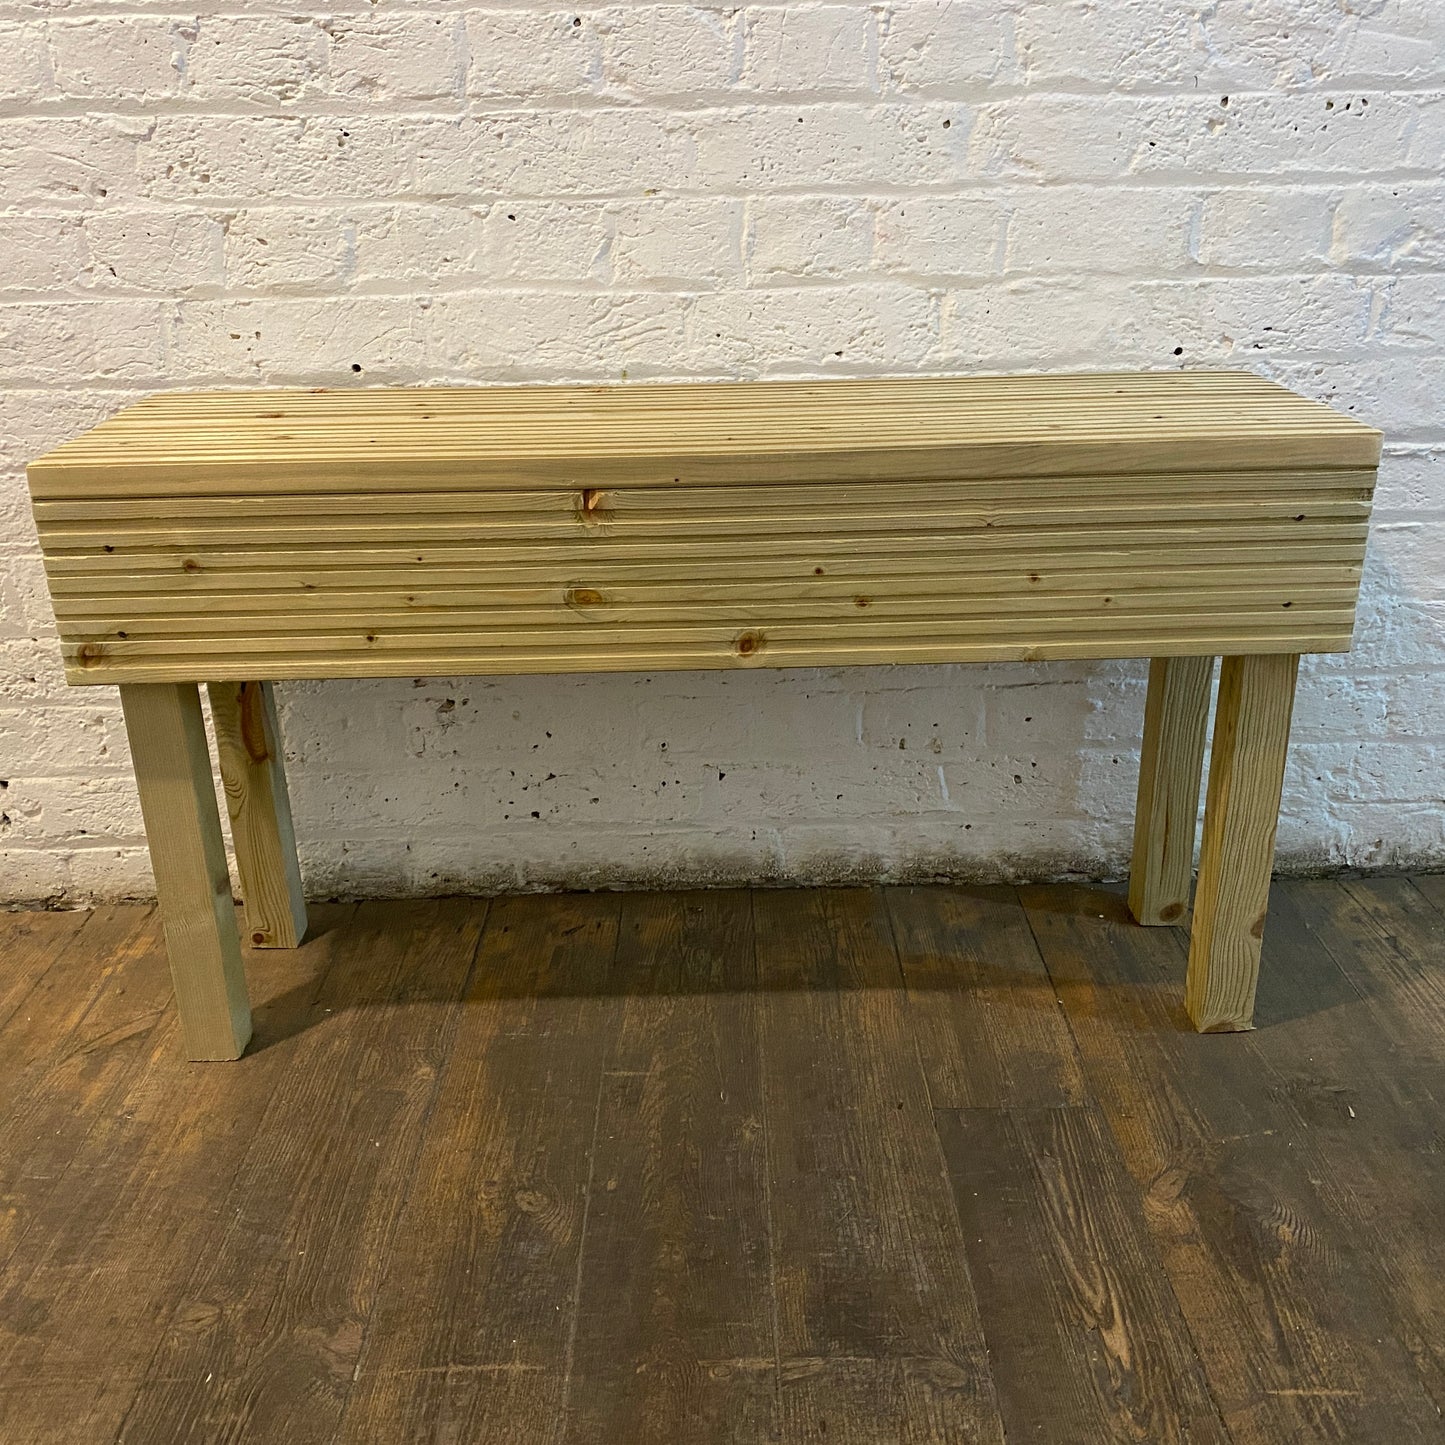 Wooden Decking Bench Groved Seat